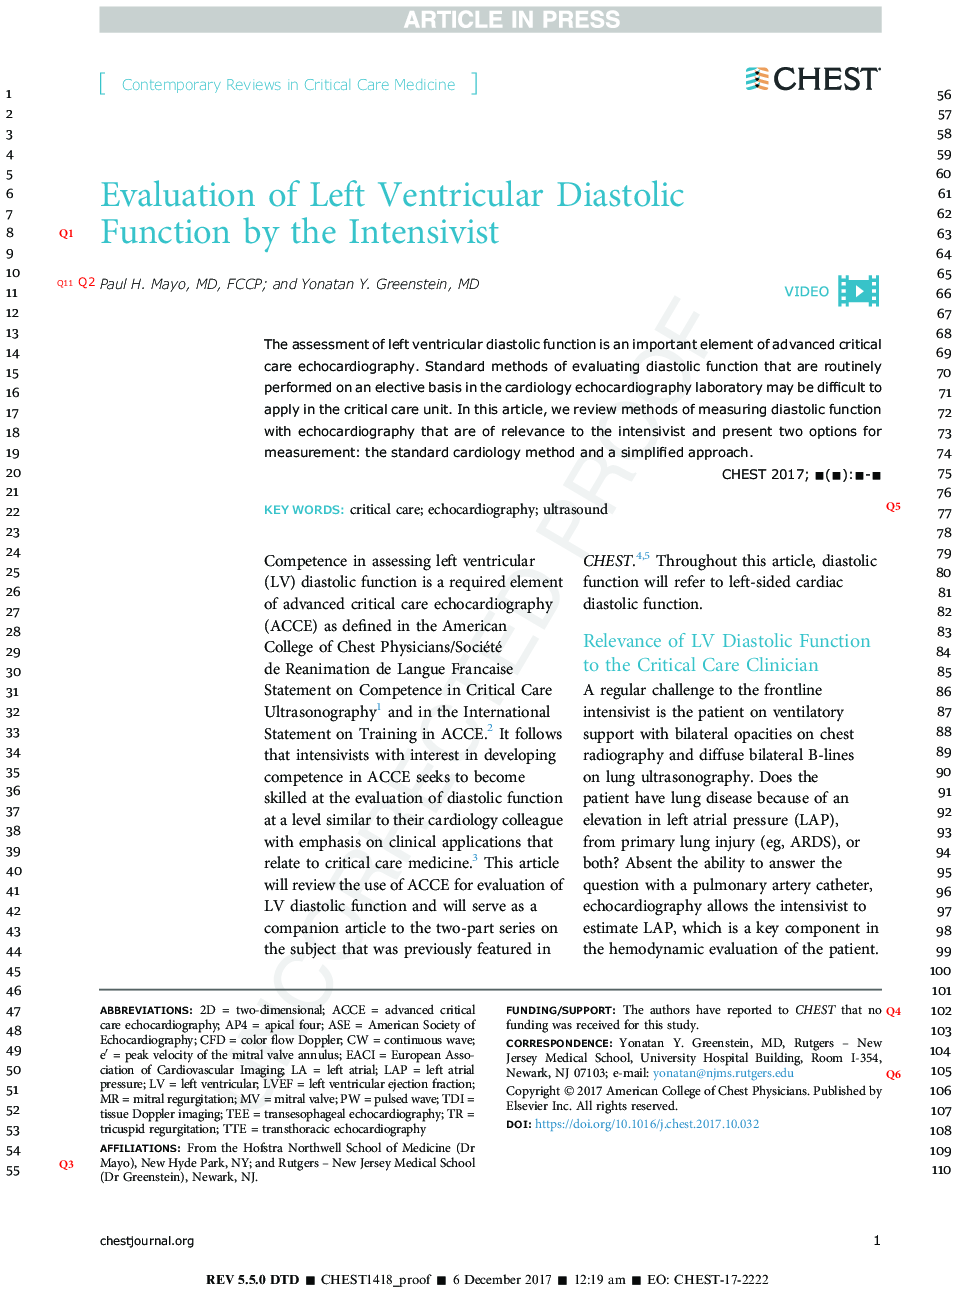 Evaluation of Left Ventricular Diastolic Function by the Intensivist